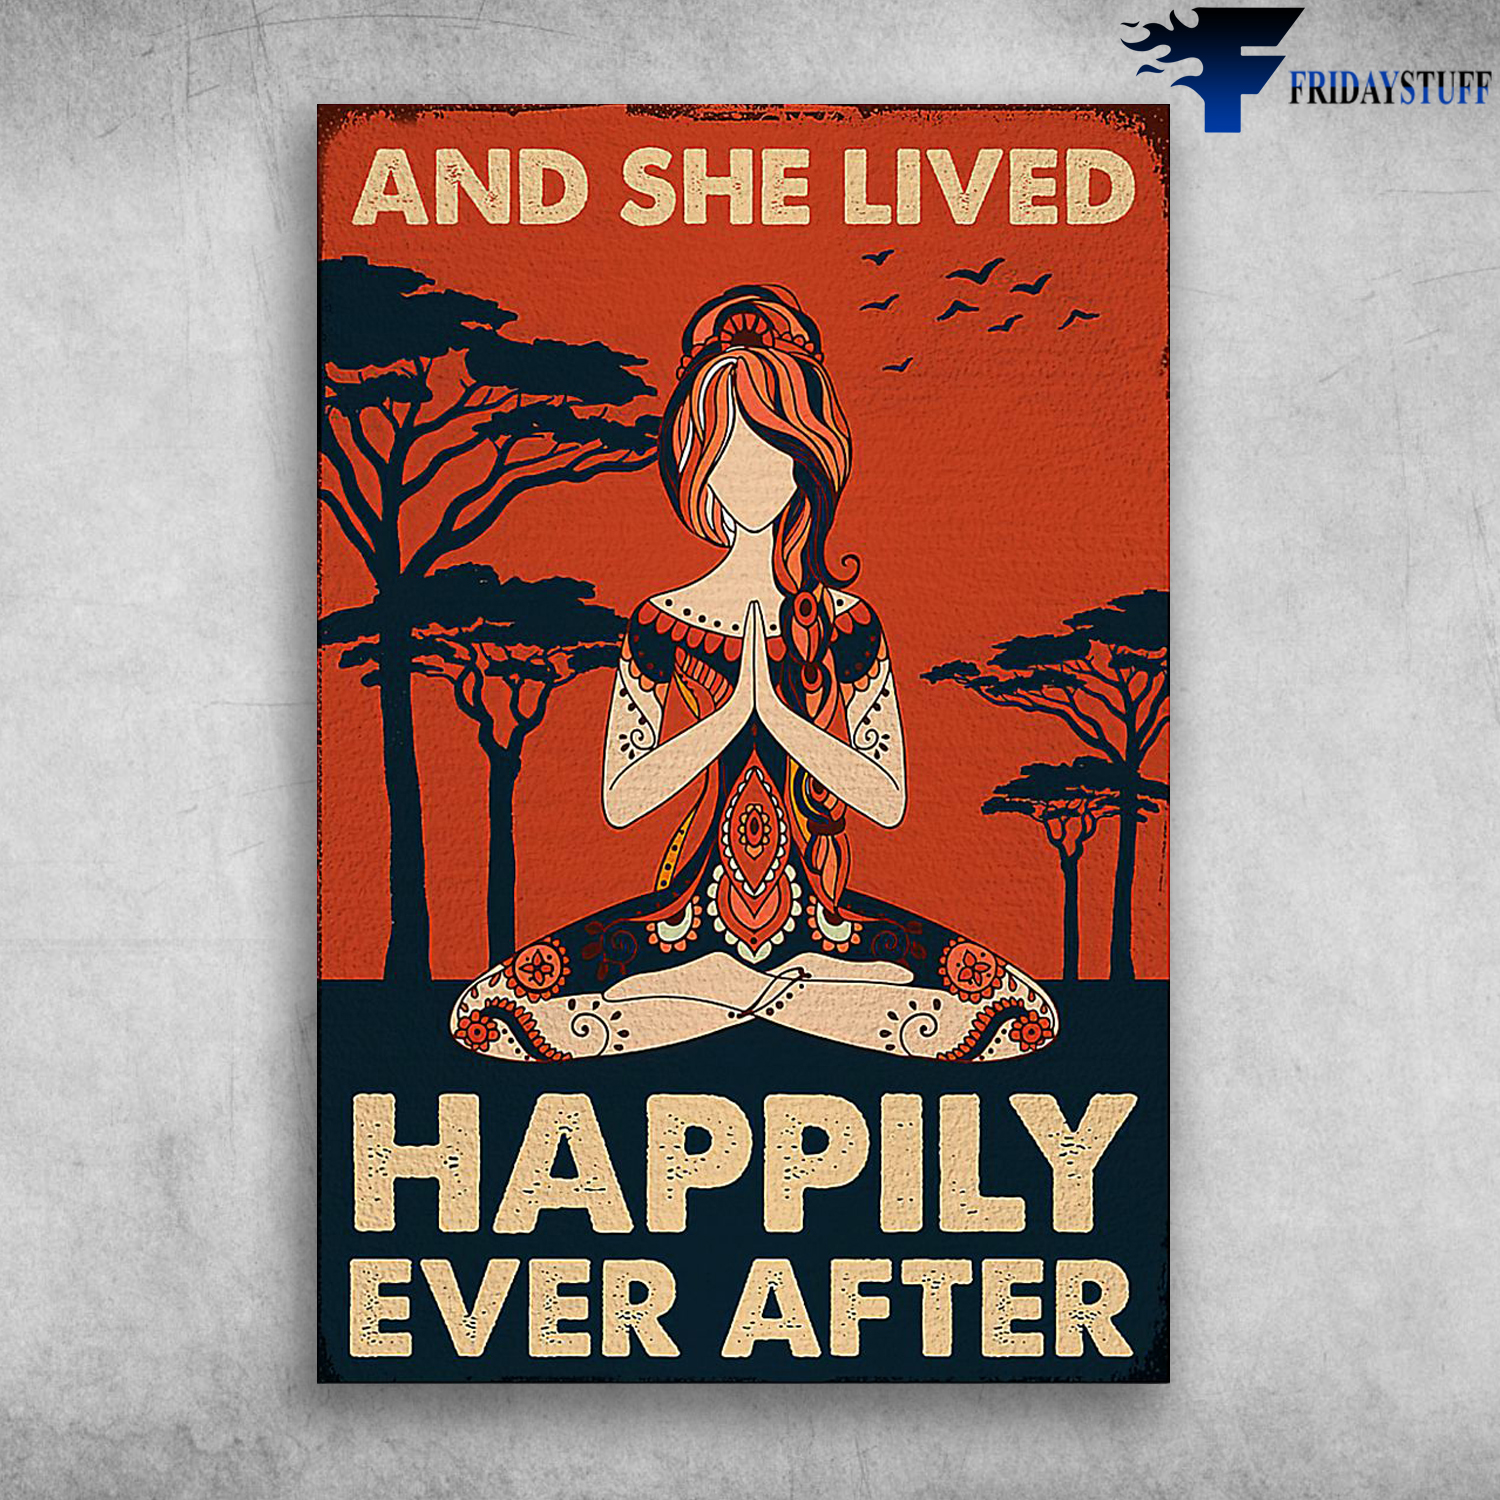 The Girl Meditated-And She Lived Happily Ever After